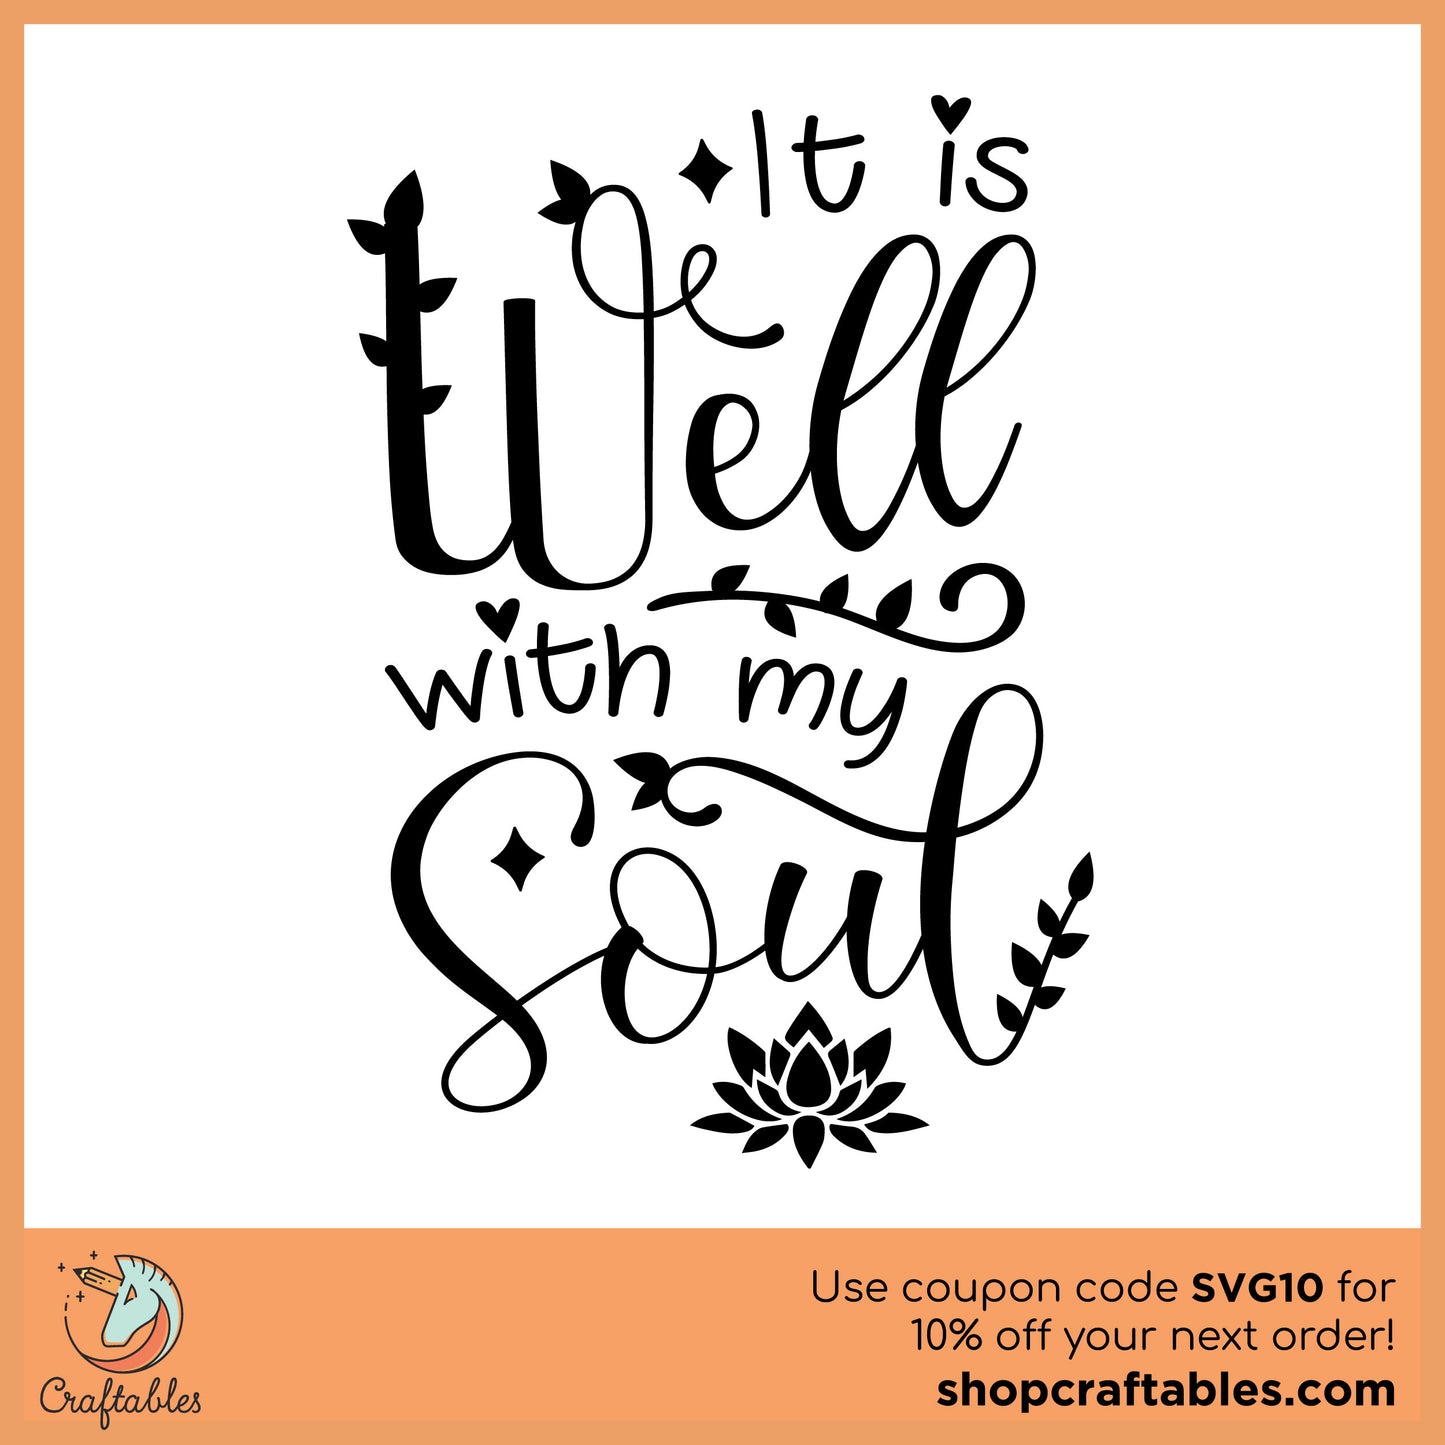 Free It is Well With My Soul SVG Cut File